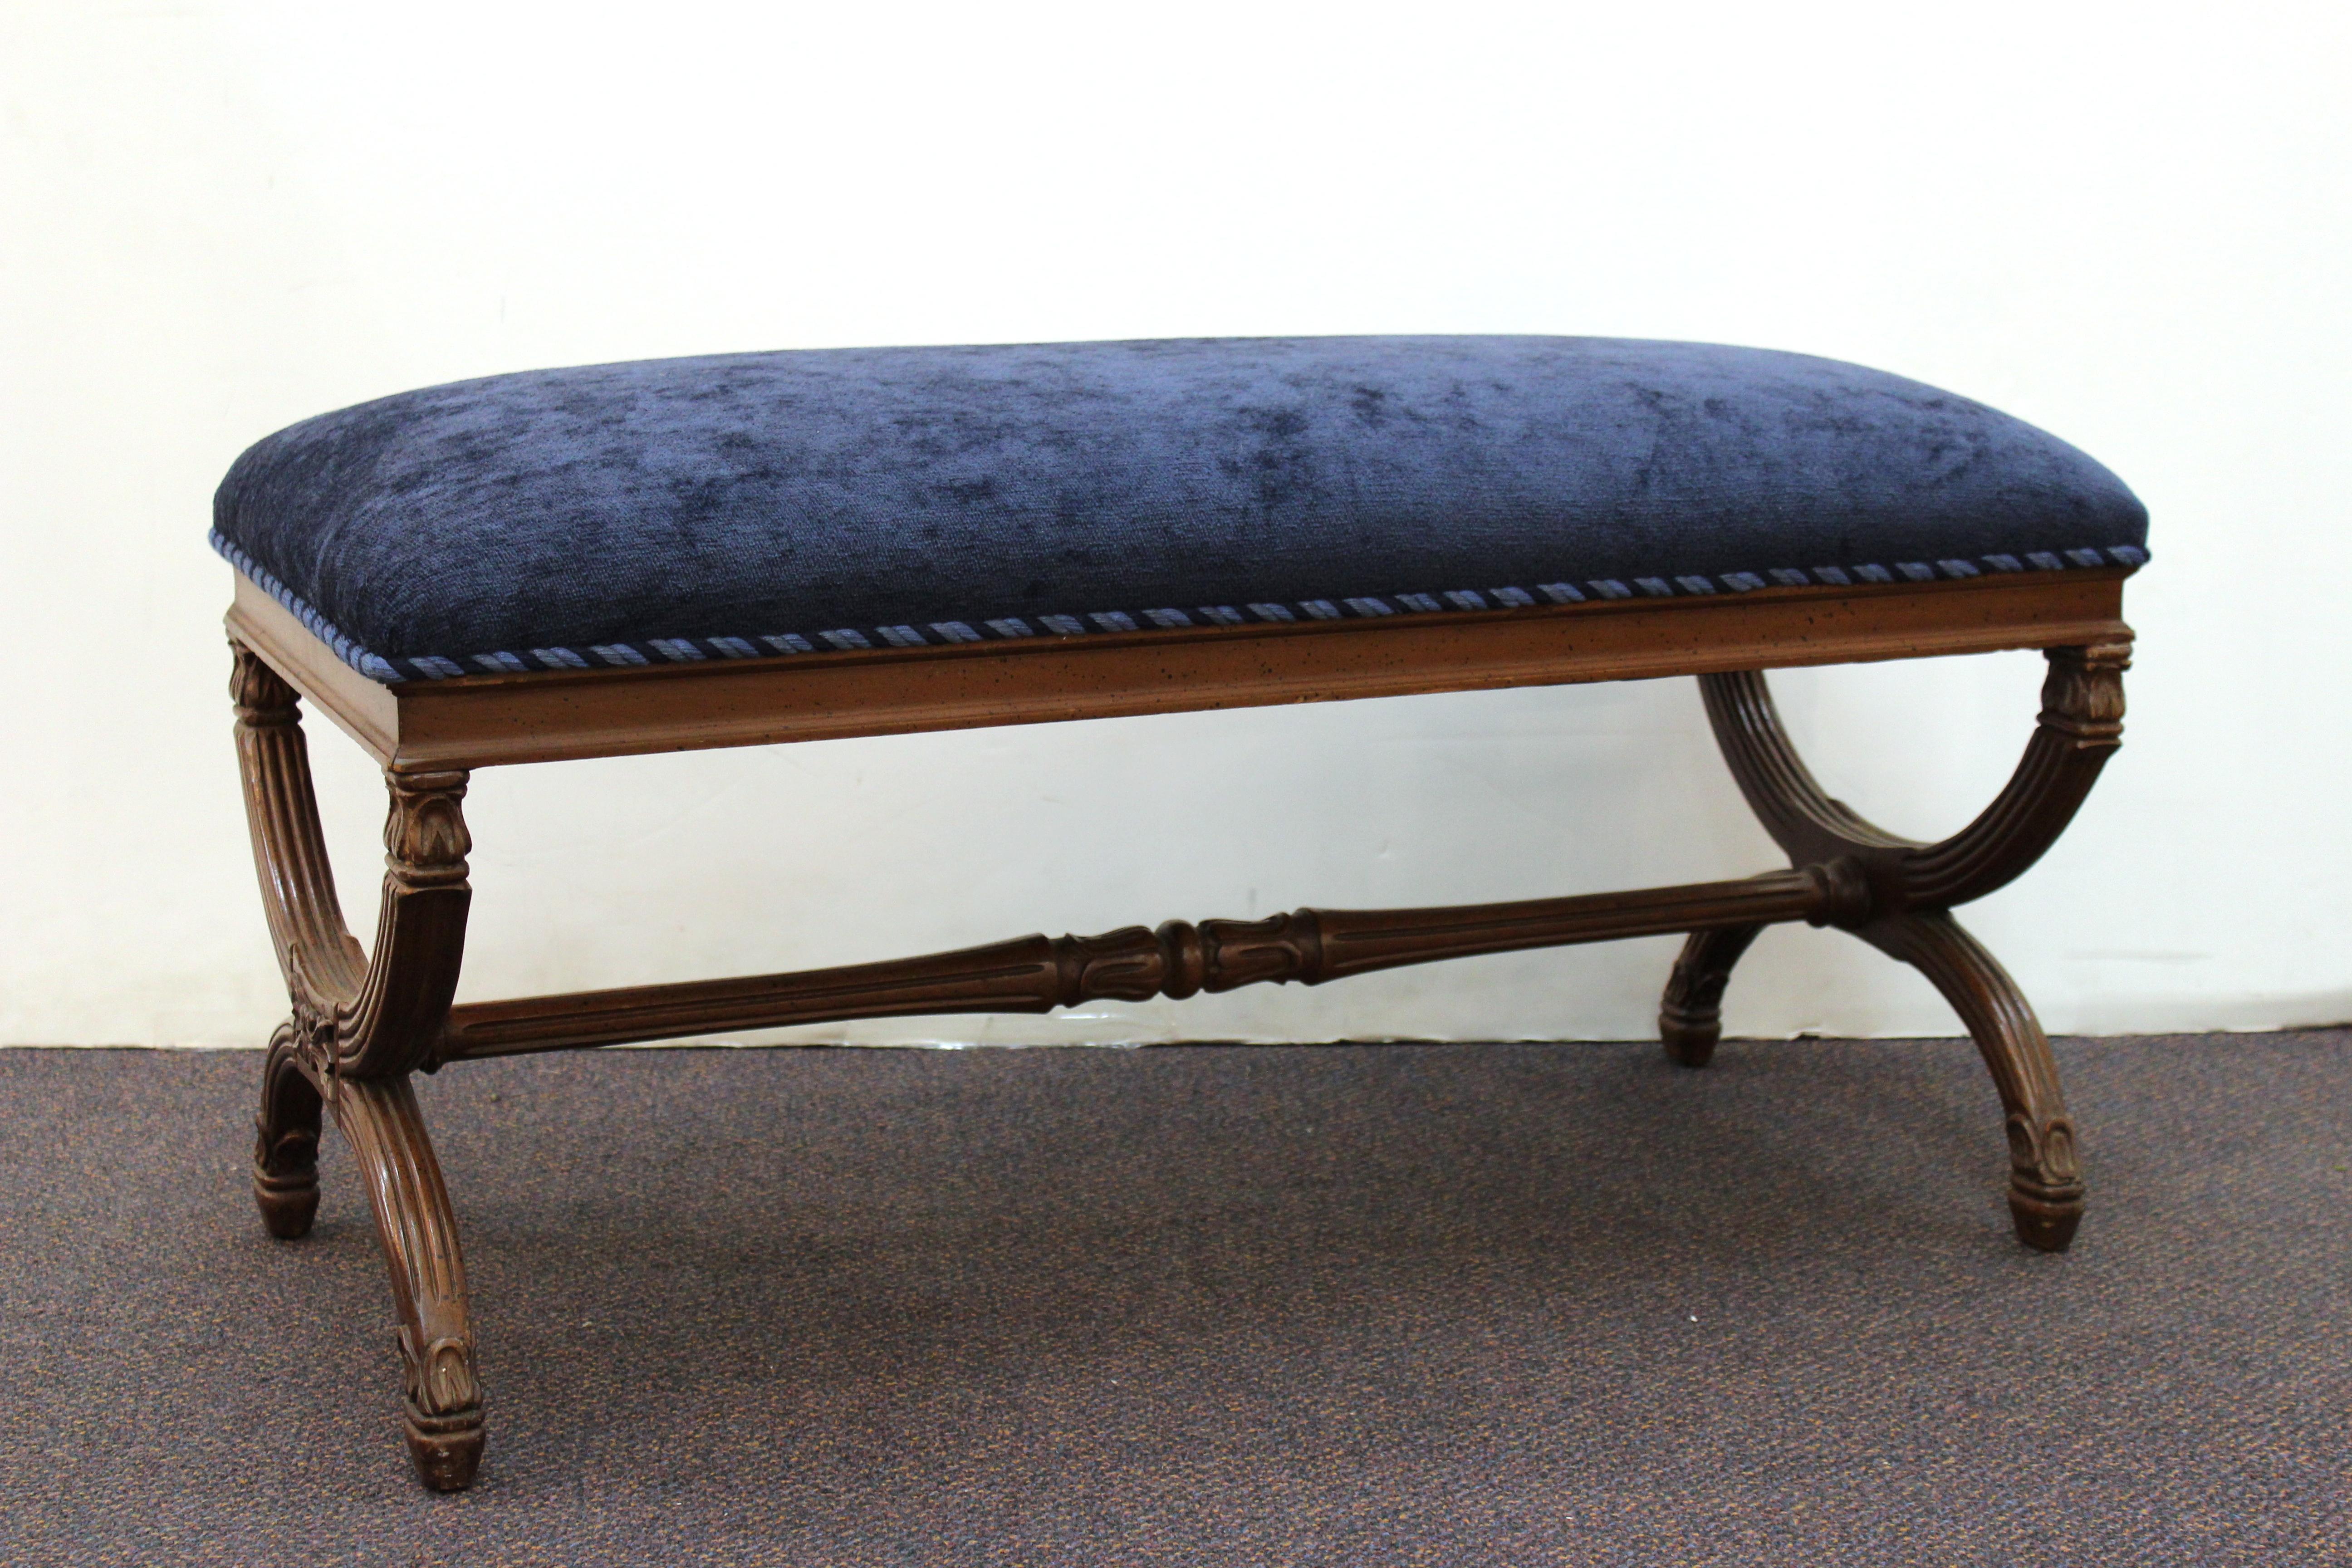 American Neoclassical Style Bench with Braided Trim and Navy Chenille Upholstery